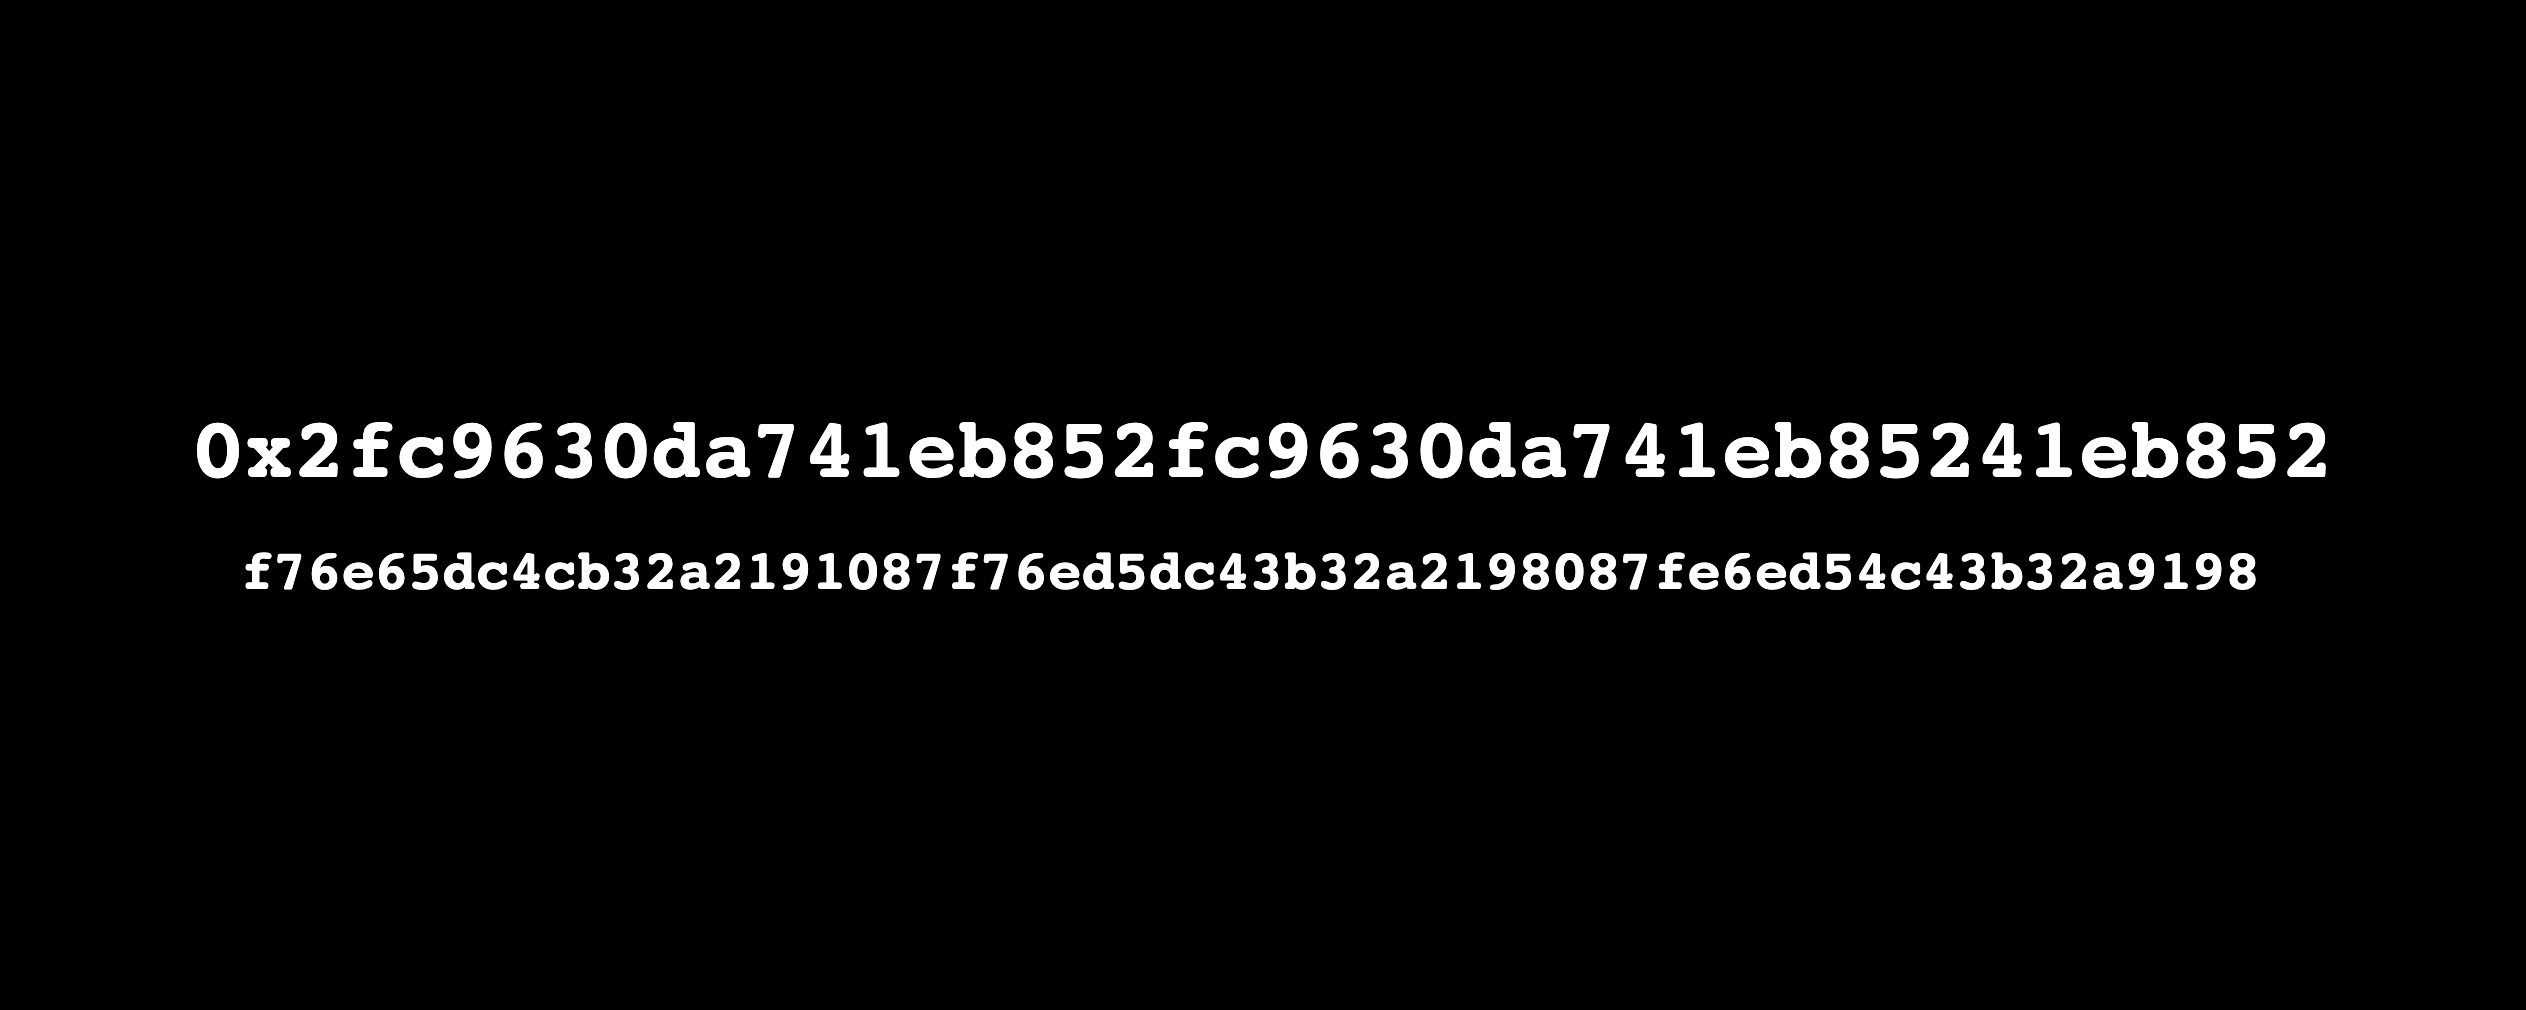 Two lines of randomized, white, hexadecimal characters centered on a black background. The first line is 40 characters long and reads: 0x21c9630da741eb8521c9630da741eb85241eb852. The second line is 64 characters long and reads: F76e65dc4cb32a219108776ed5dc43632a2198087e6ed54c43632a9198